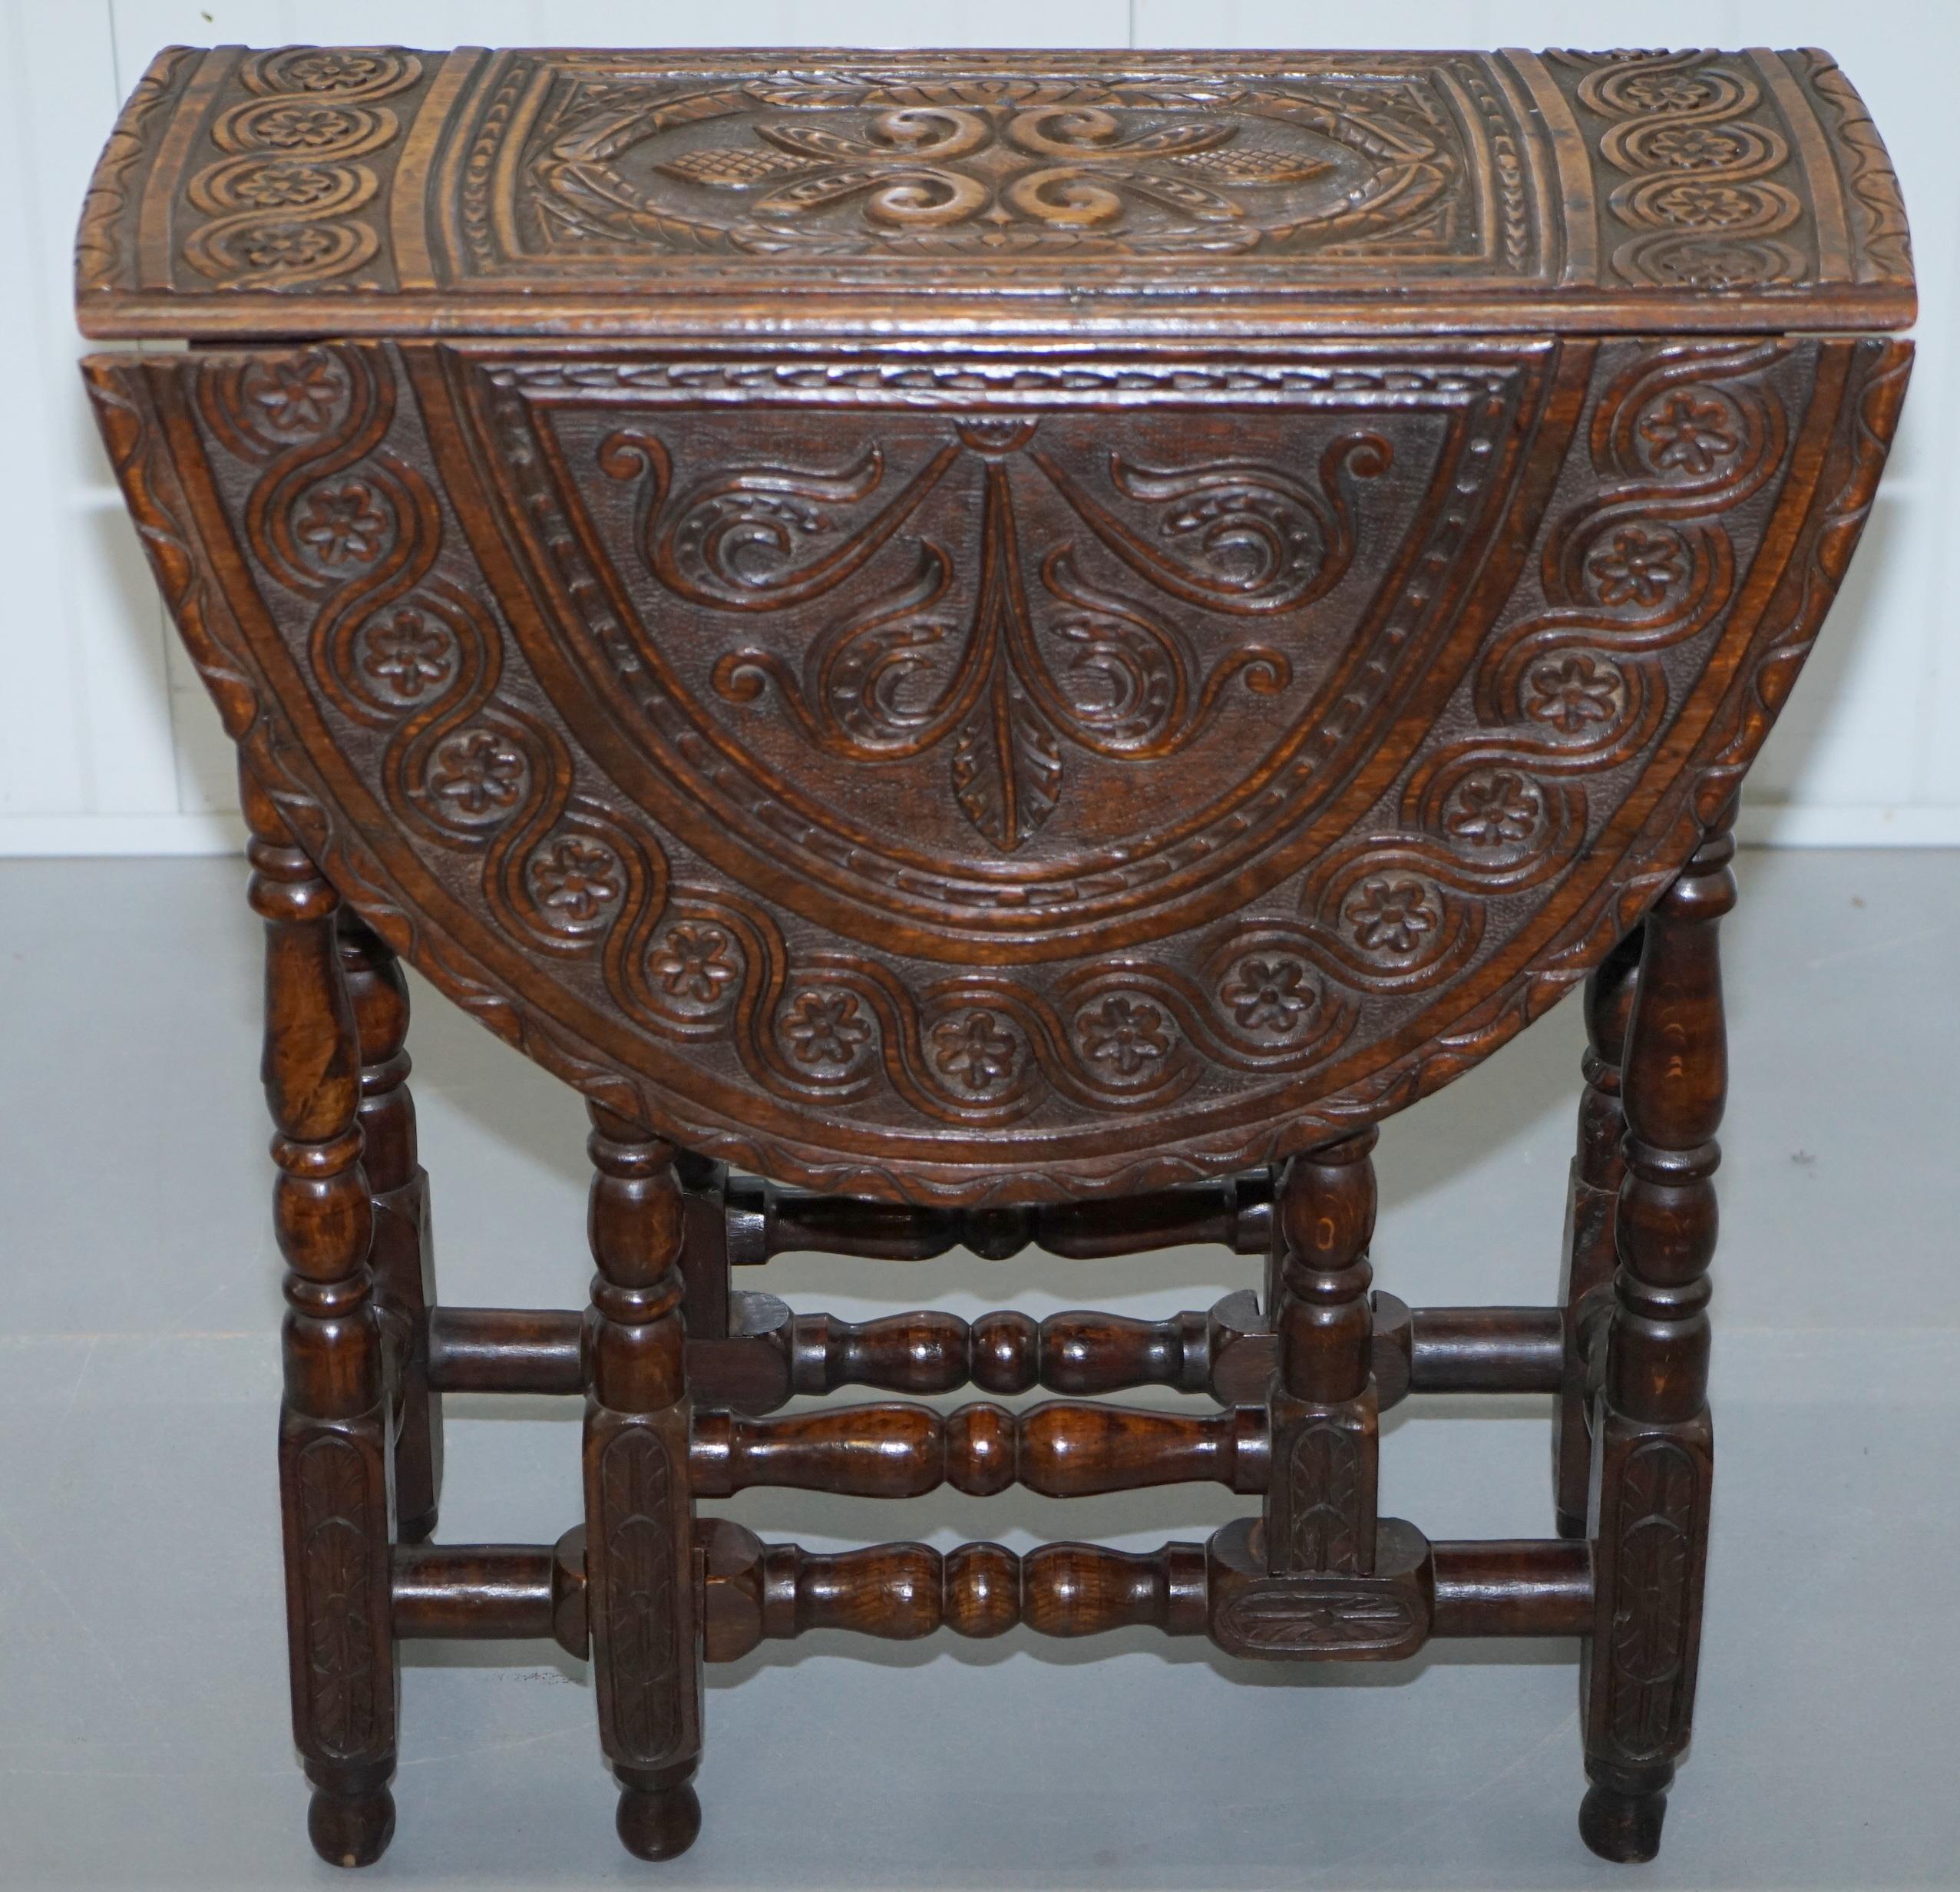 We are delighted to offer for sale this lovely little Georgian hand-carved in the Jacobean manor folding gateleg table

A good looking and well-made table, the carving was most likely added in the Victorian era, much as was the fashion in this